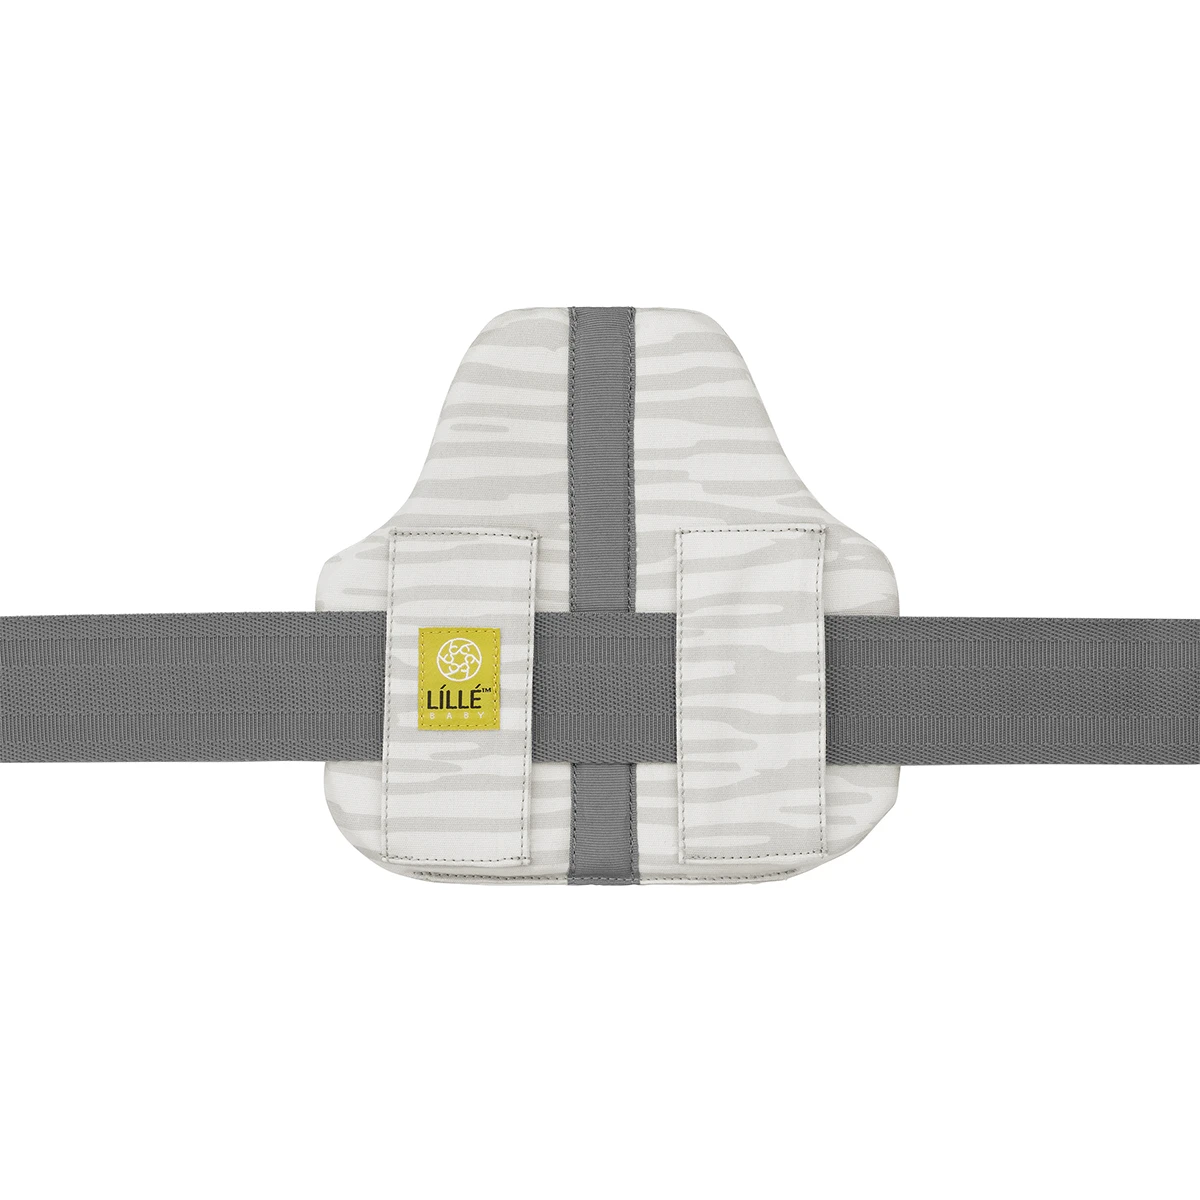 CarryOn Airflow DLX in Marble lumbar support